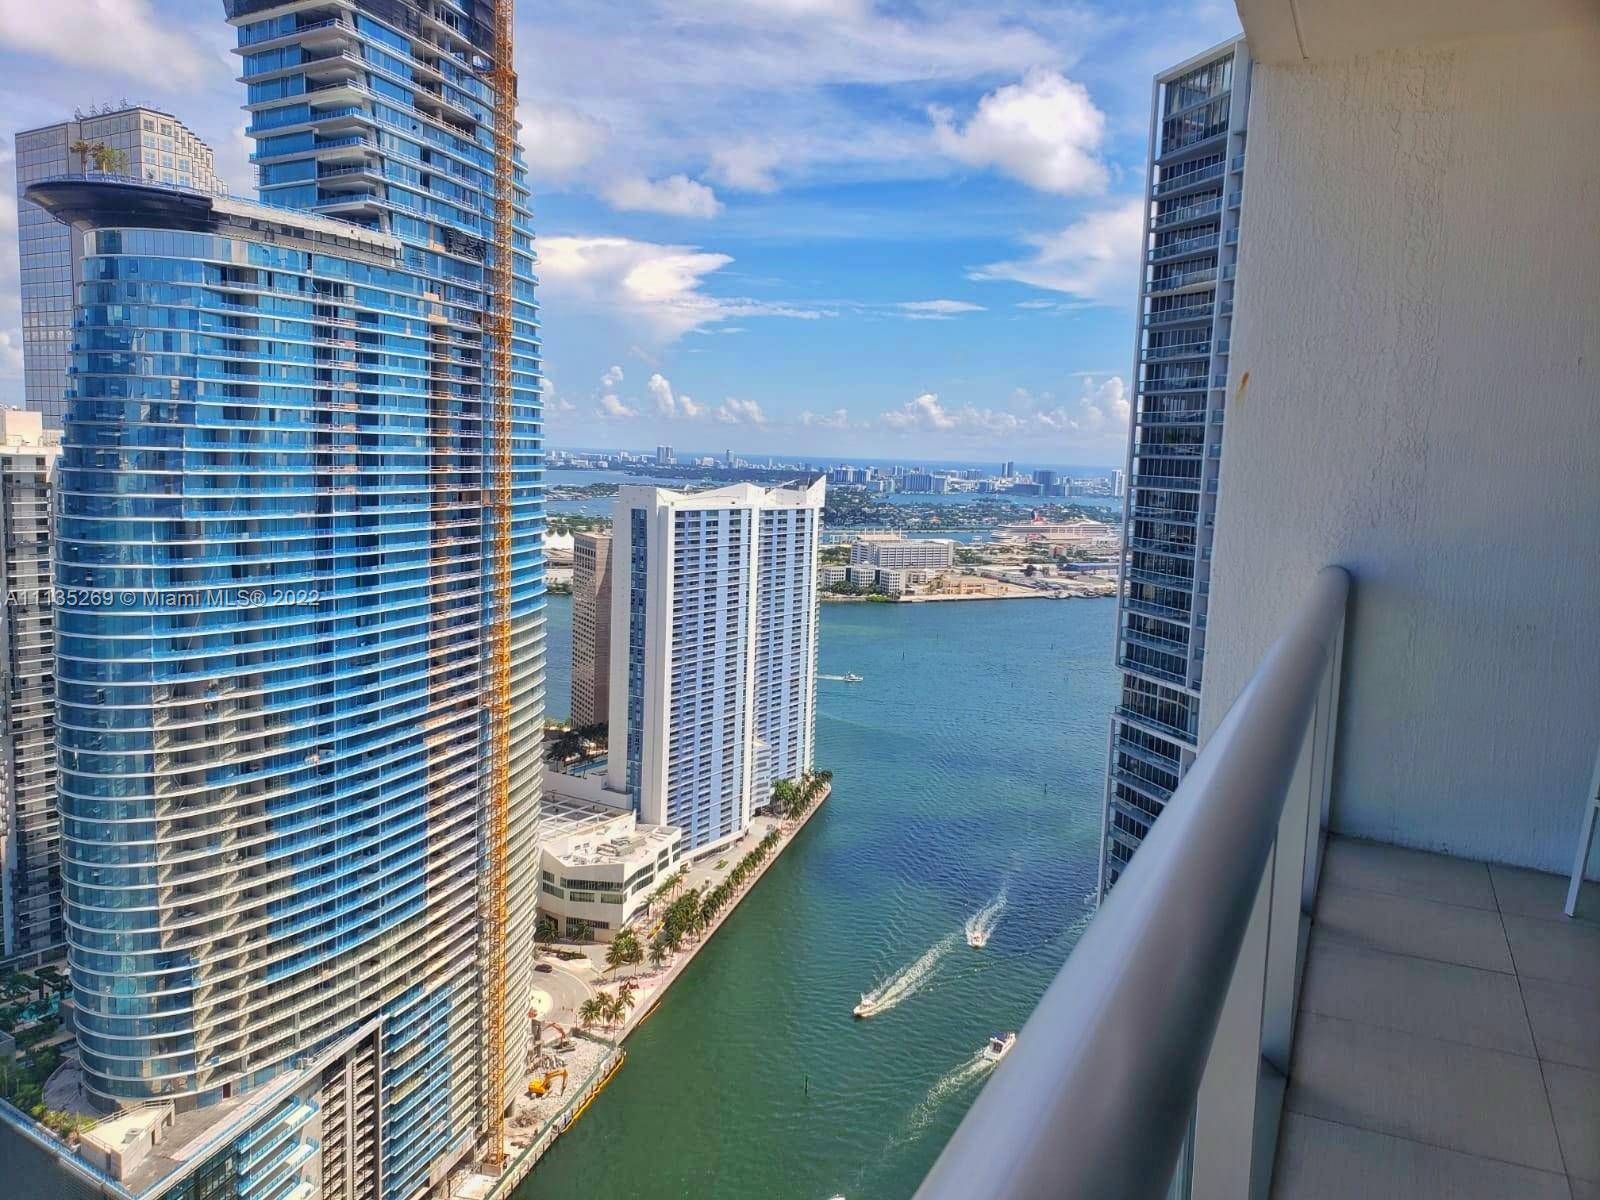 Short term rentals allowed!  Spectacular Penthouse 1/1  Fully Furnished, breathtaking water & skyline views and private large balcony. Luxury 50- story Tower located in the heart of Financial District in Miami. private balcony.  Rentals daily, weekly, monthly, long term permitted and much more.